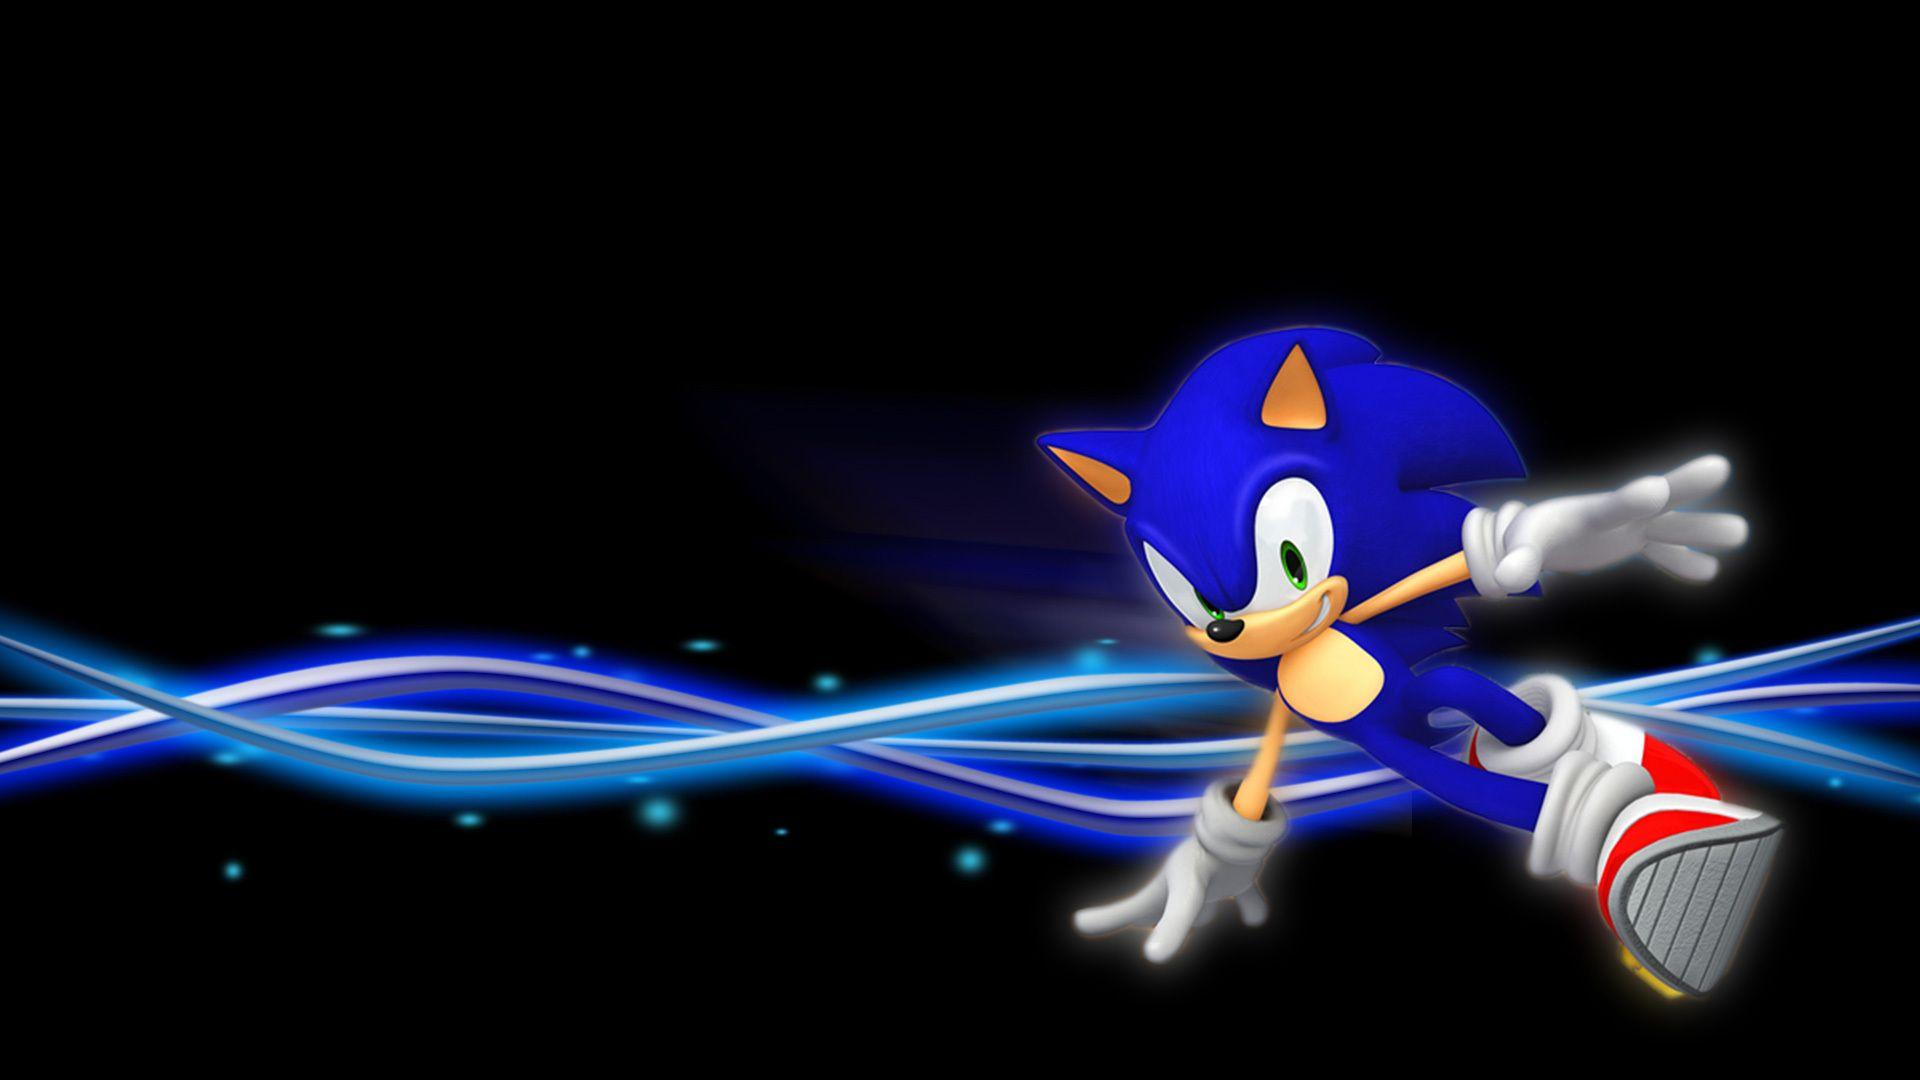 cool wallpaper xp. WallPapers. Sonic the hedgehog